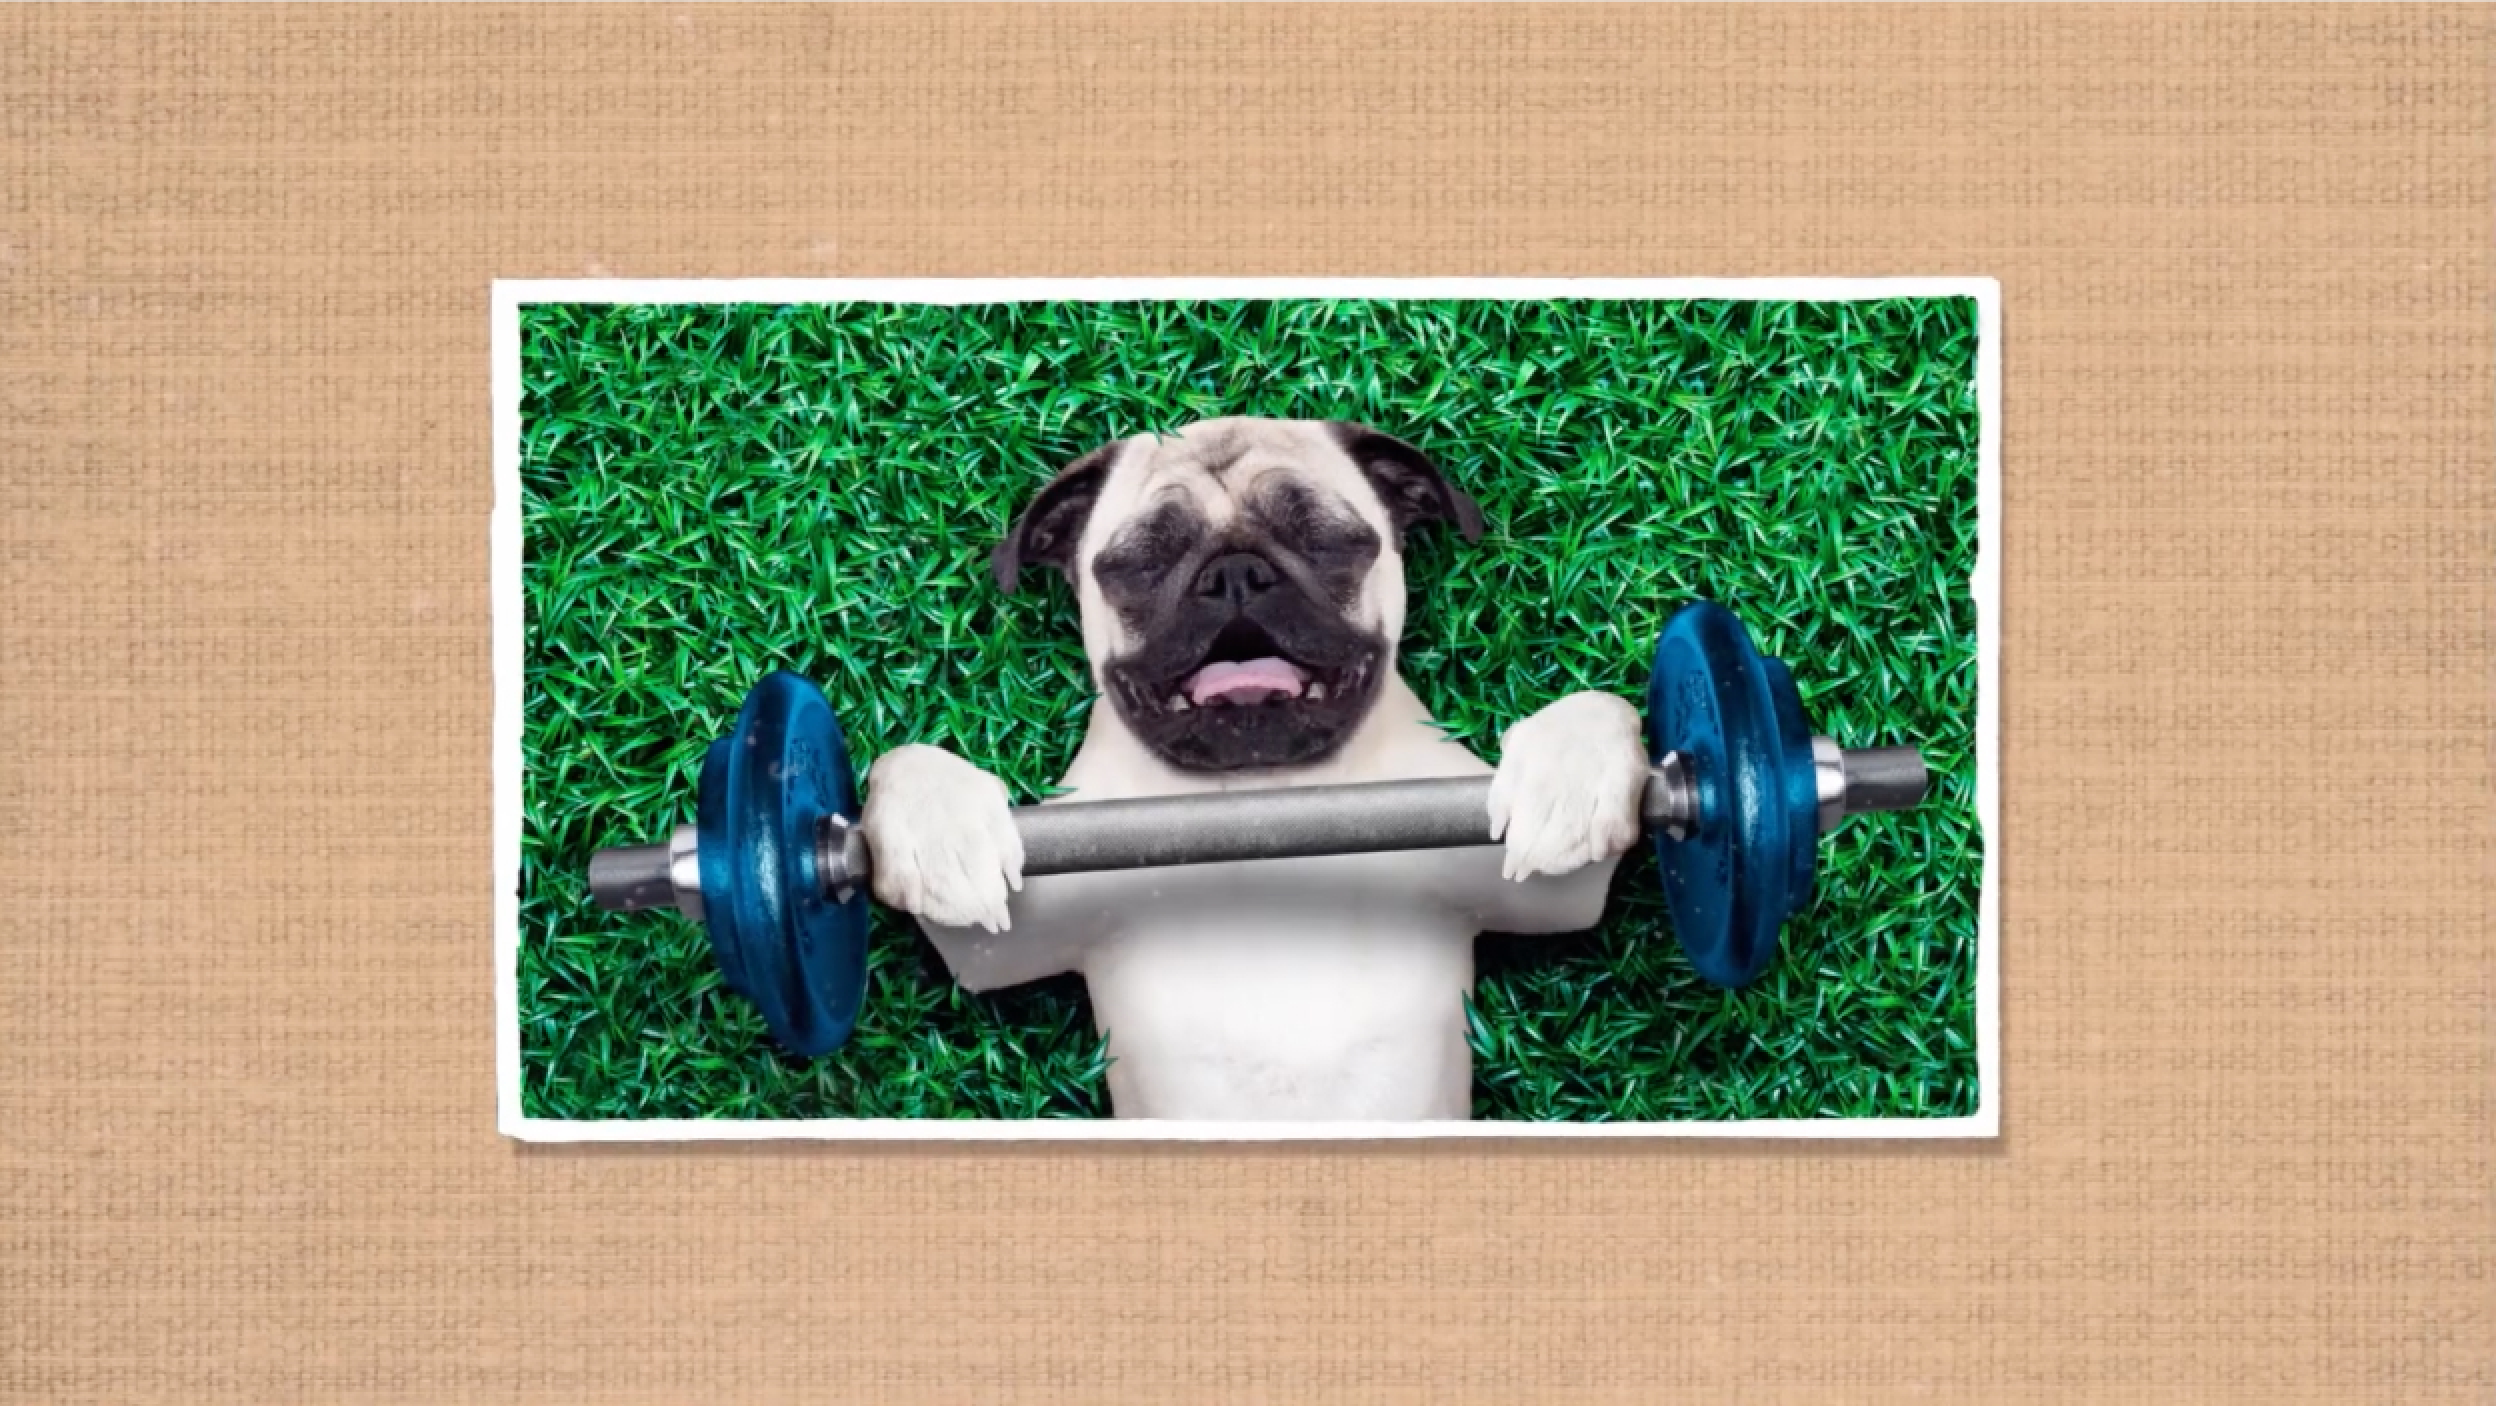 Social media asset for ClearScore. Photo of a pug lying on the grass holding a mini barbell over him. Photo is on a cork board inspired background.